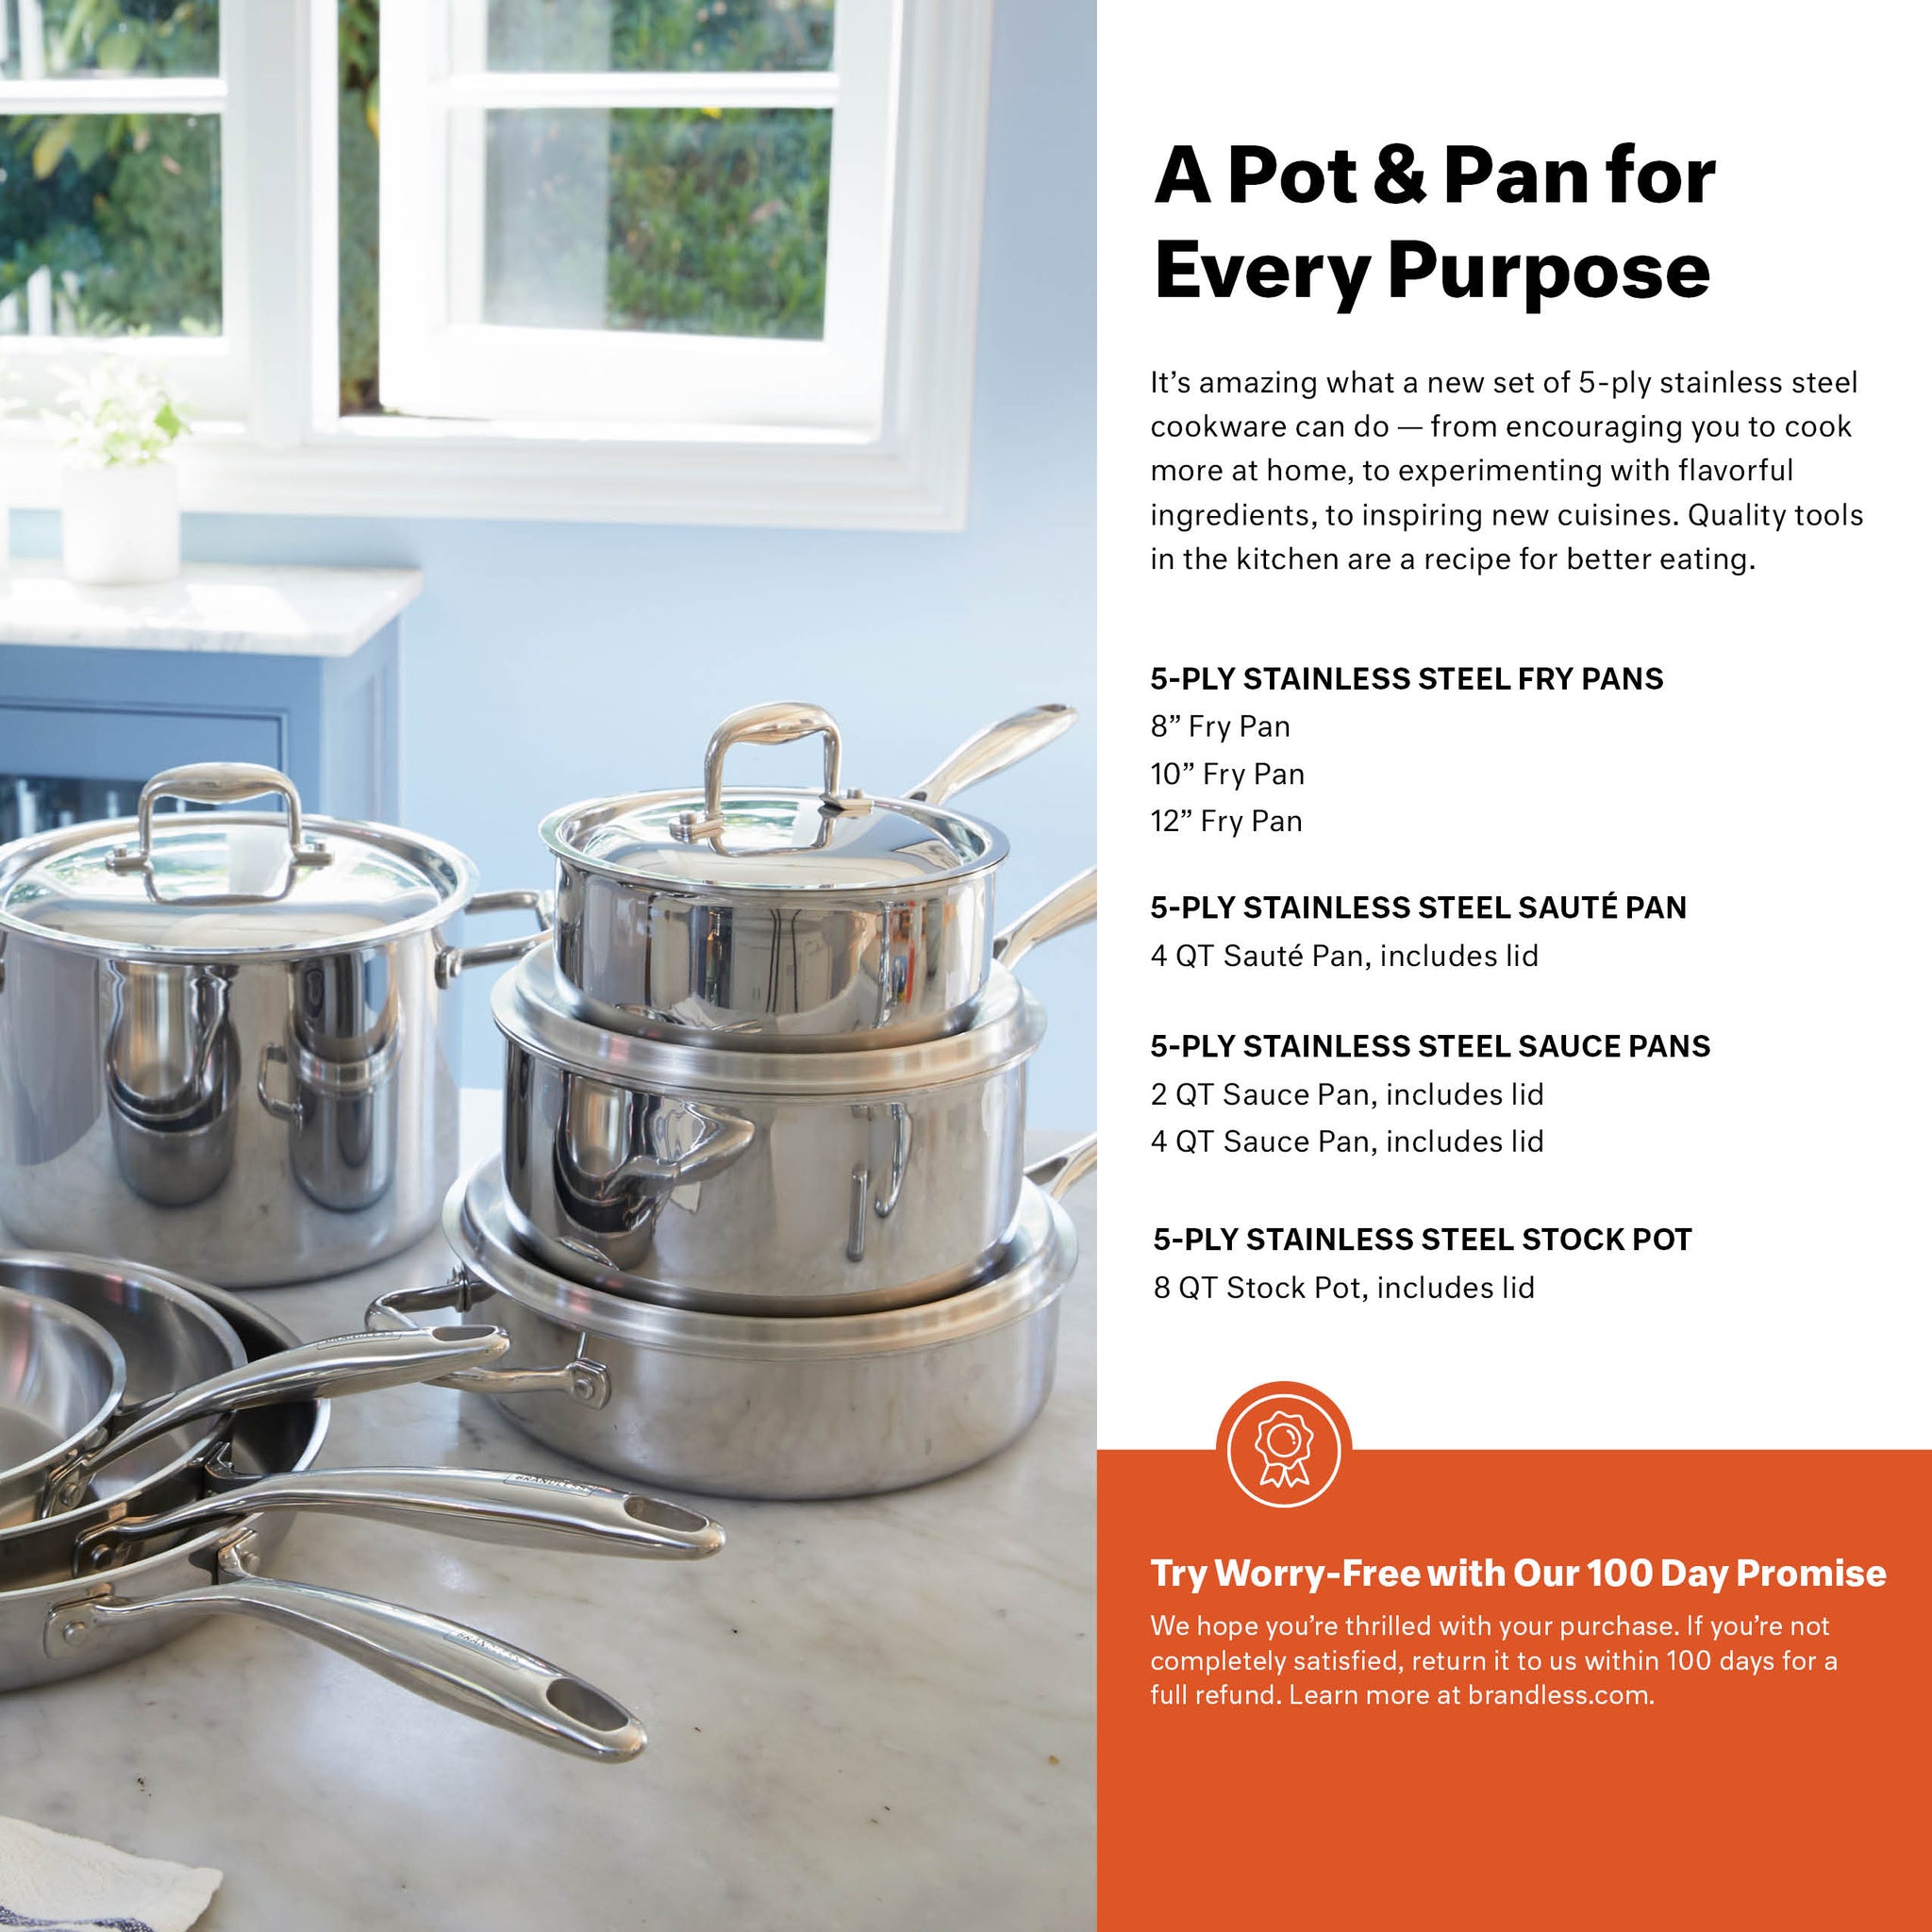 American Kitchen Cookware - 4 qt. Covered Saucepan / Stainless Steel